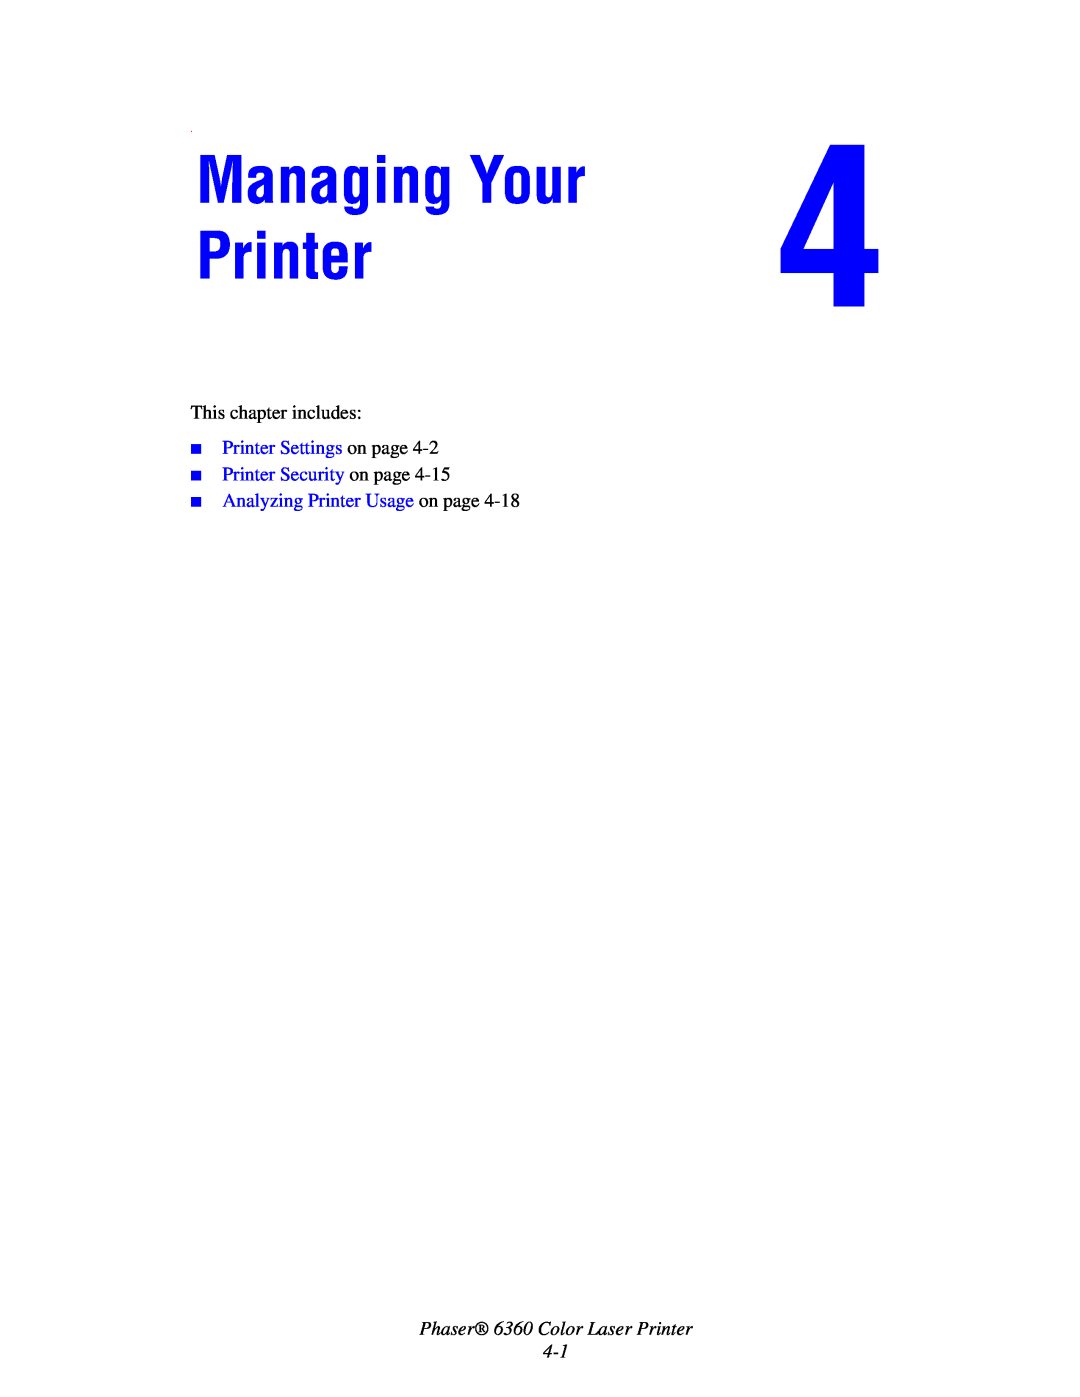 Xerox 6360 manual Managing Your Printer, Printer Settings on page Printer Security on page, Analyzing Printer Usage on page 